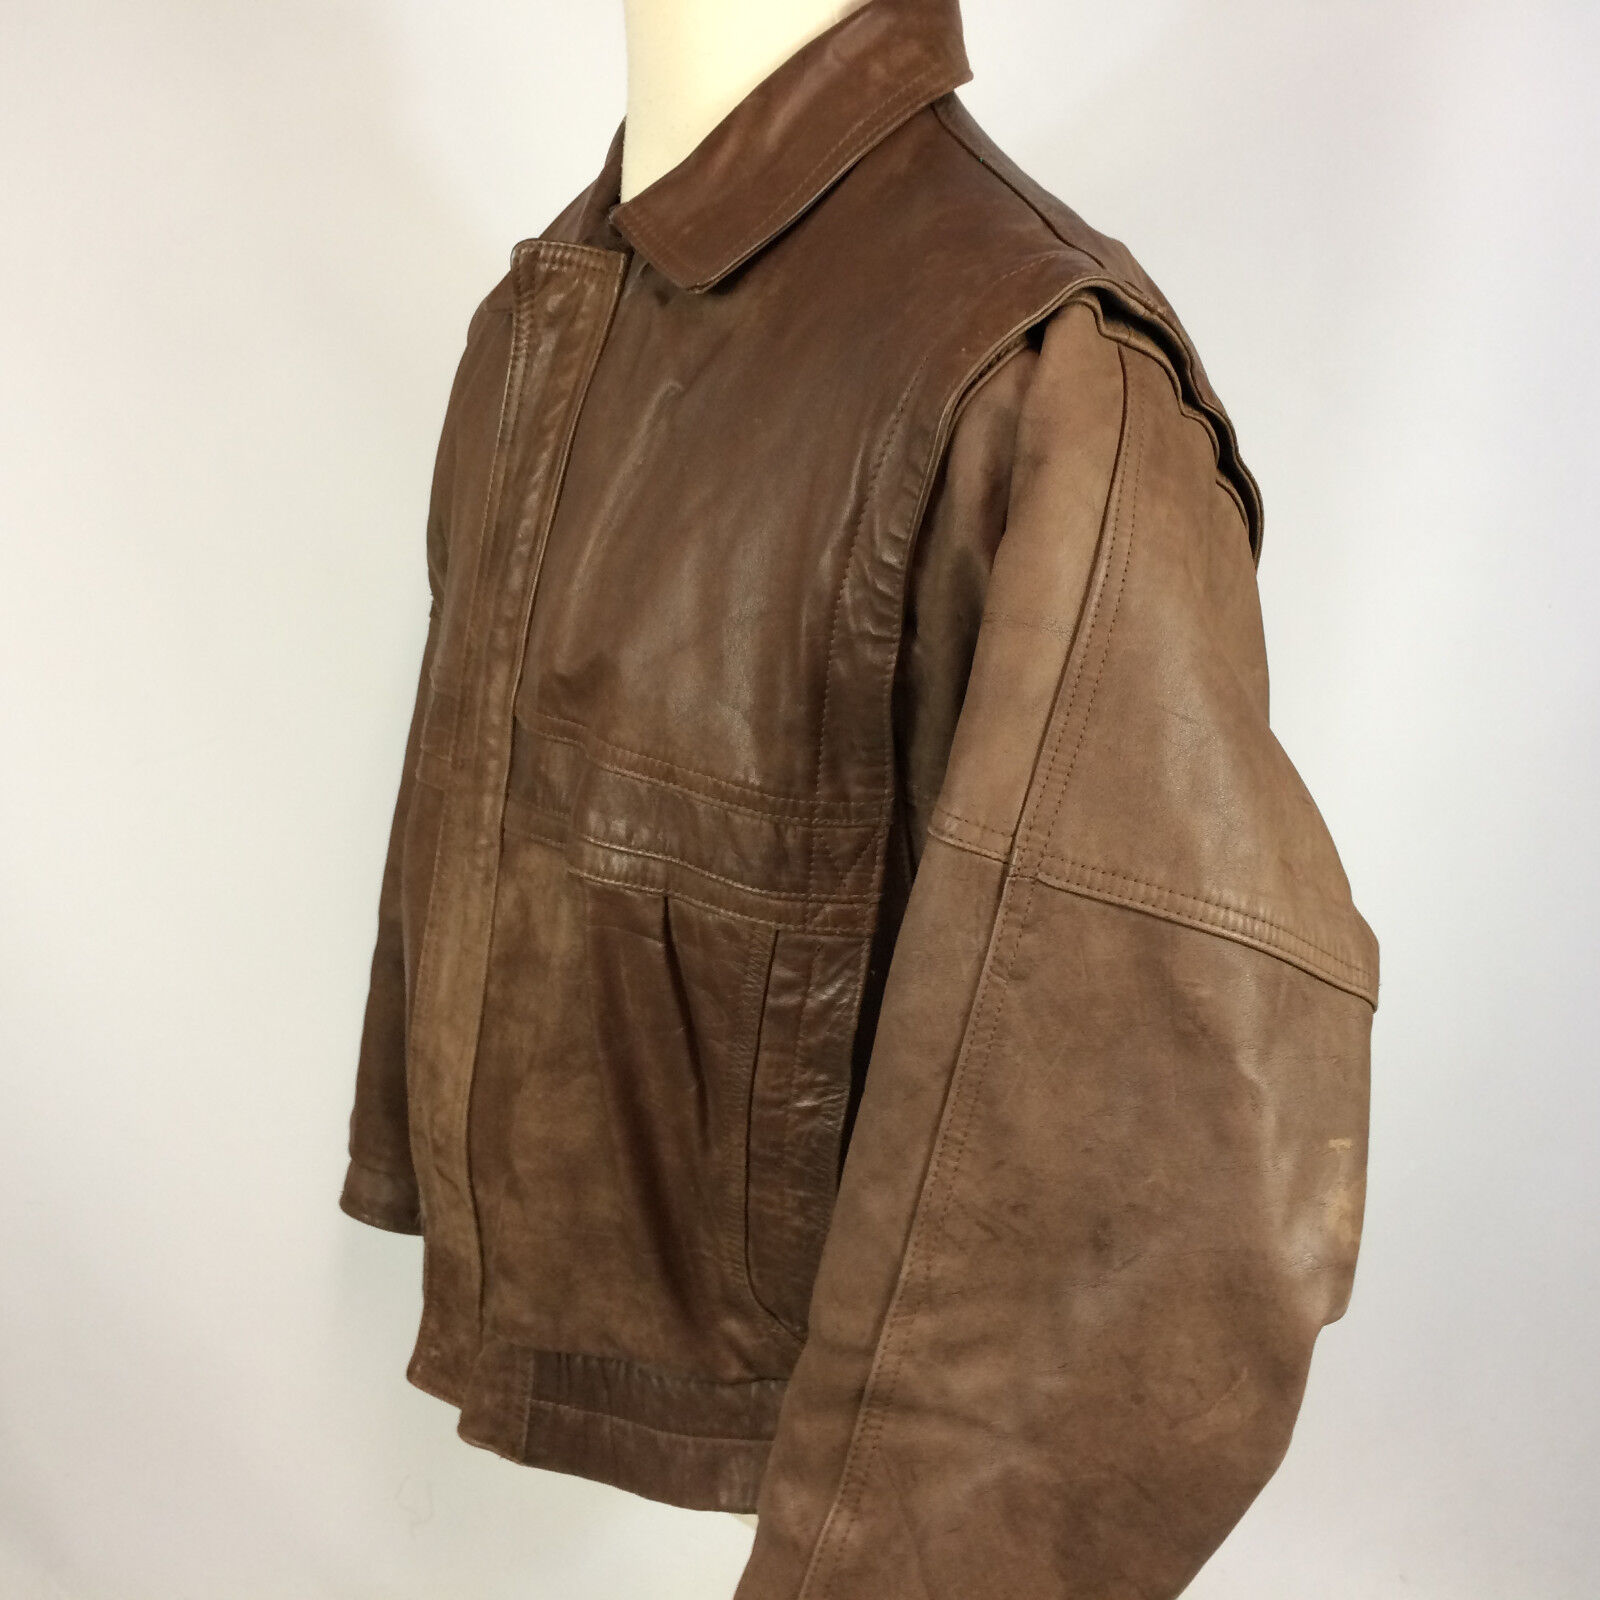 Vintage 80s 90s Army Military WWII Style Leather Brown Tanker 